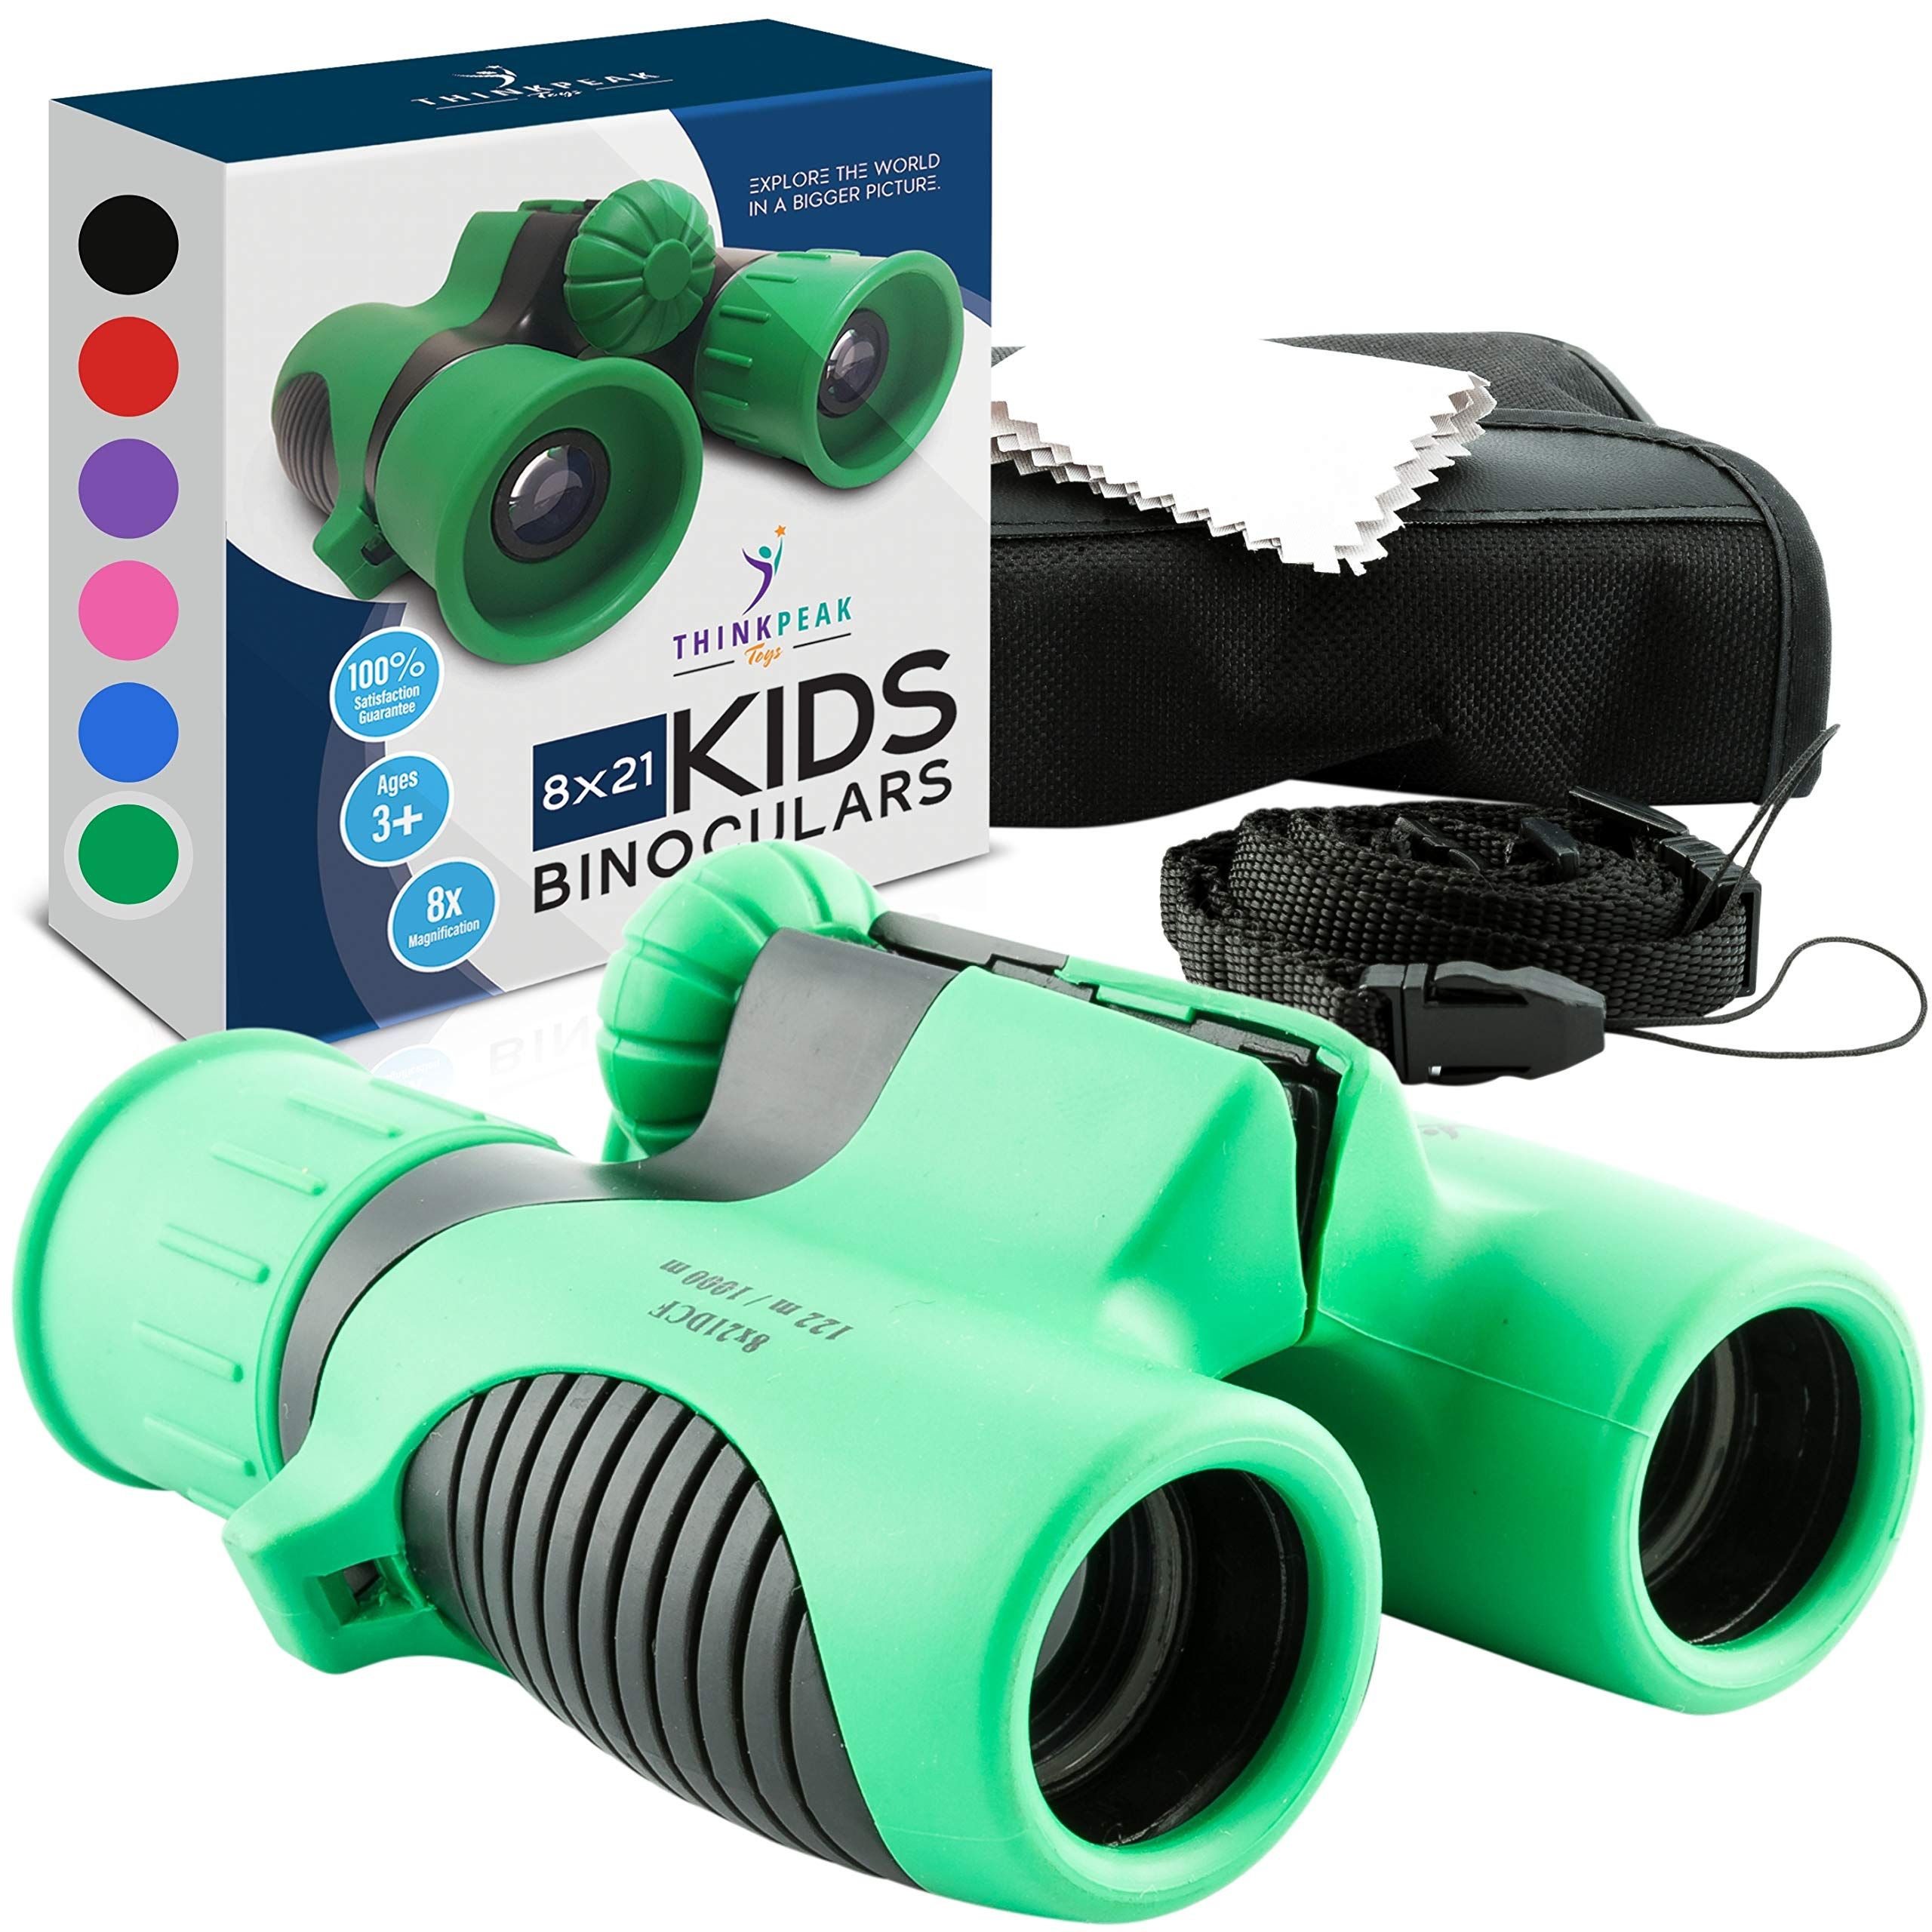 Binoculars for Kids - Small, Compact, Shock-Resistant Toy Binoculars - Learning & Nature Exploration | Amazon (US)